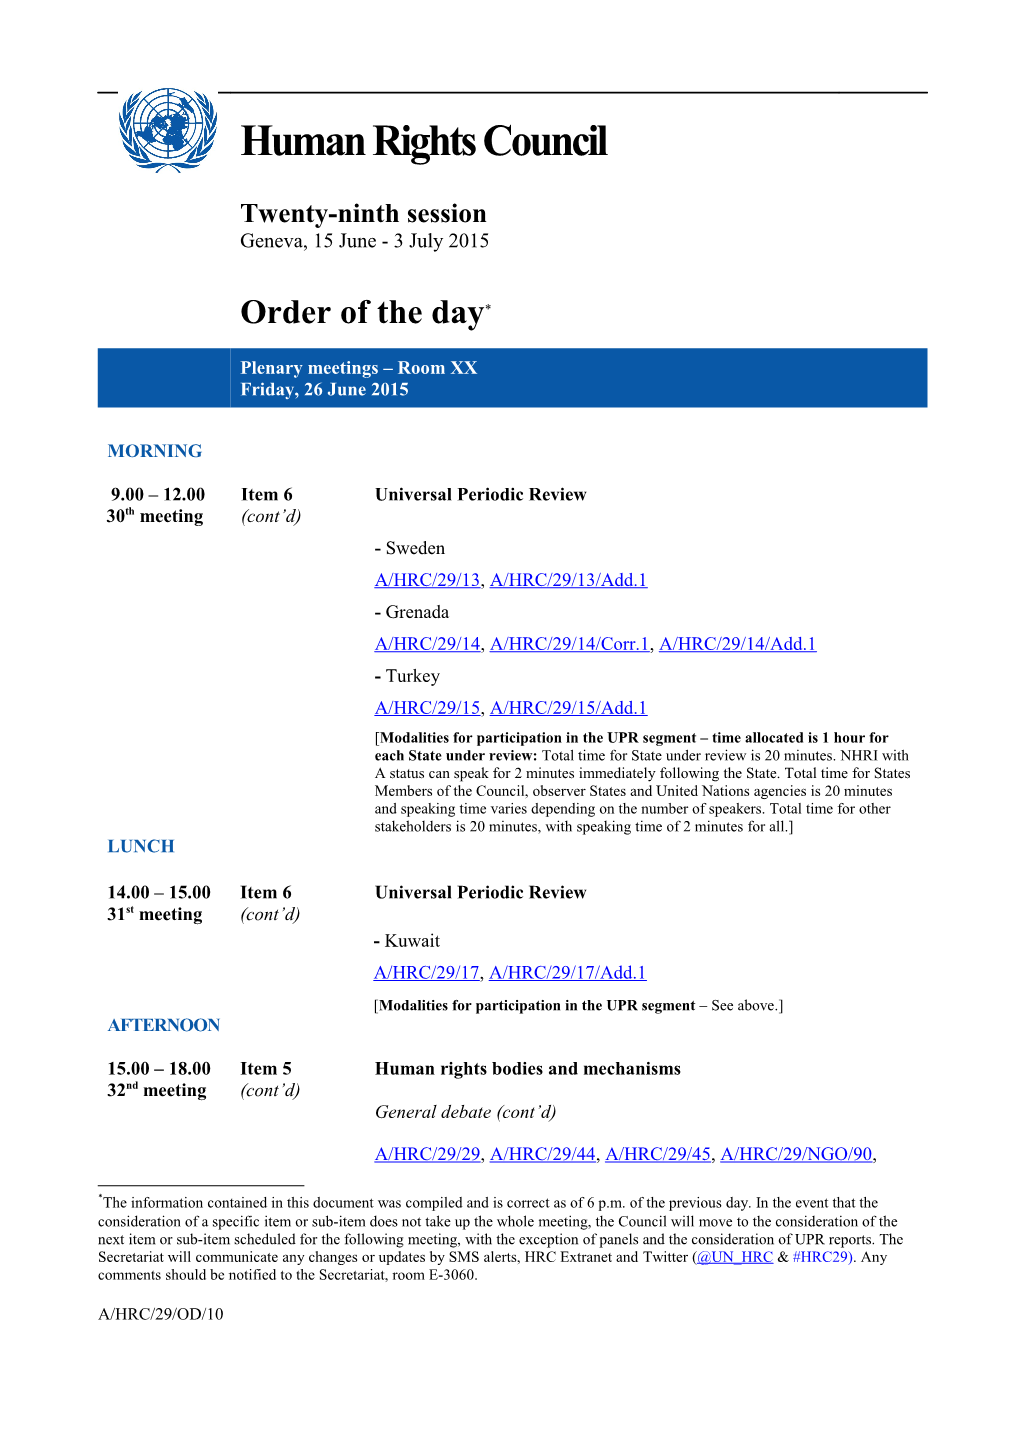 Friday, 26 June 2015, Order of the Day in English